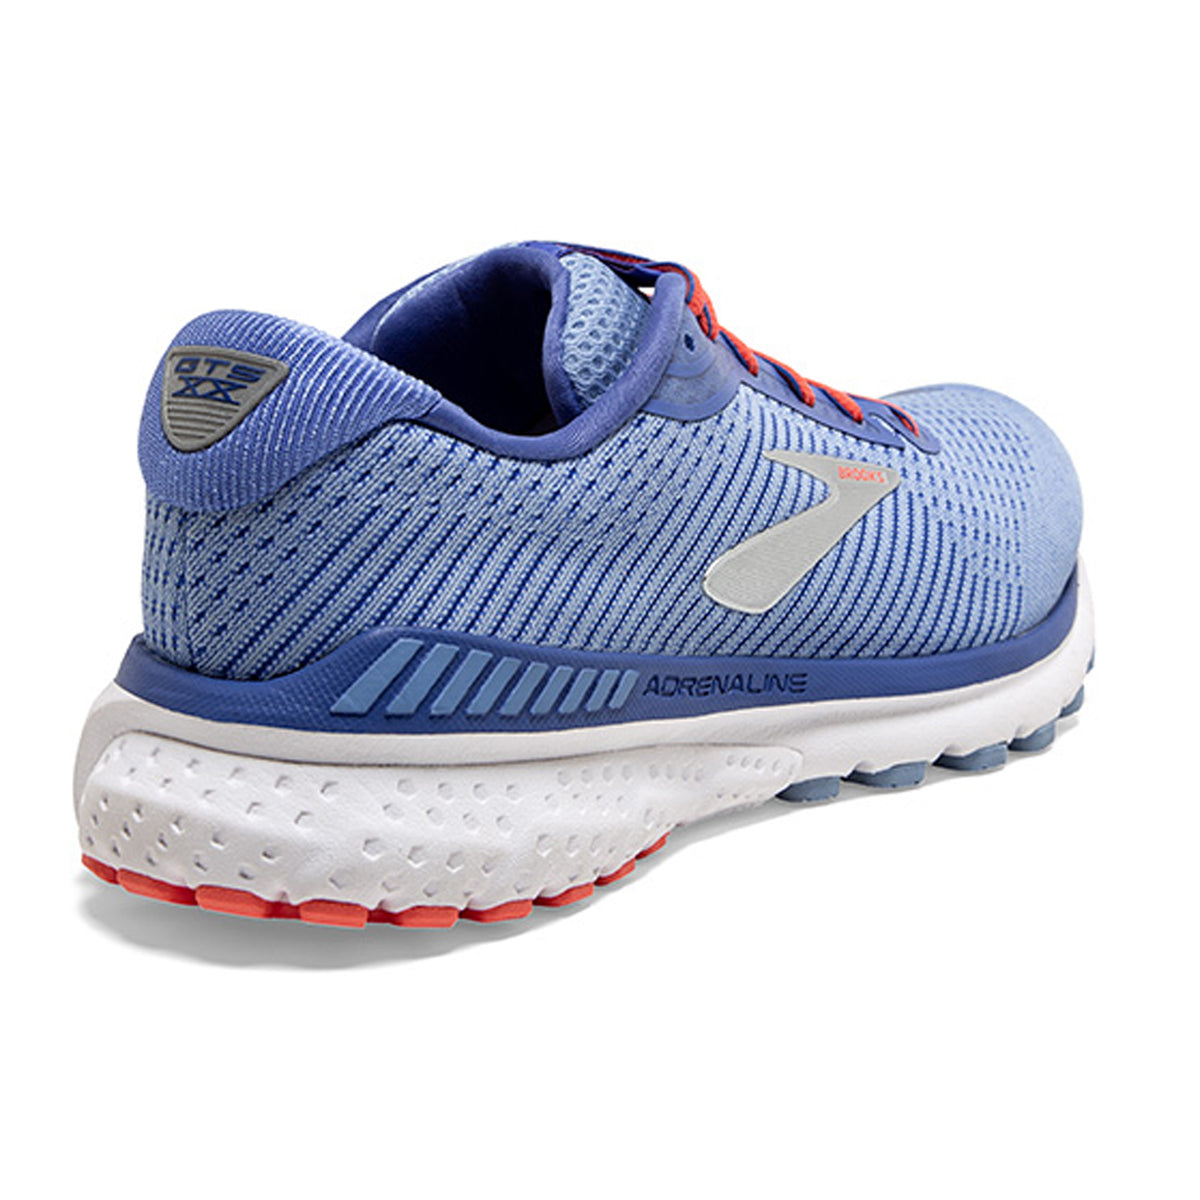 The Brooks Adrenaline GTS 20 – Supporting runners for over 20 years